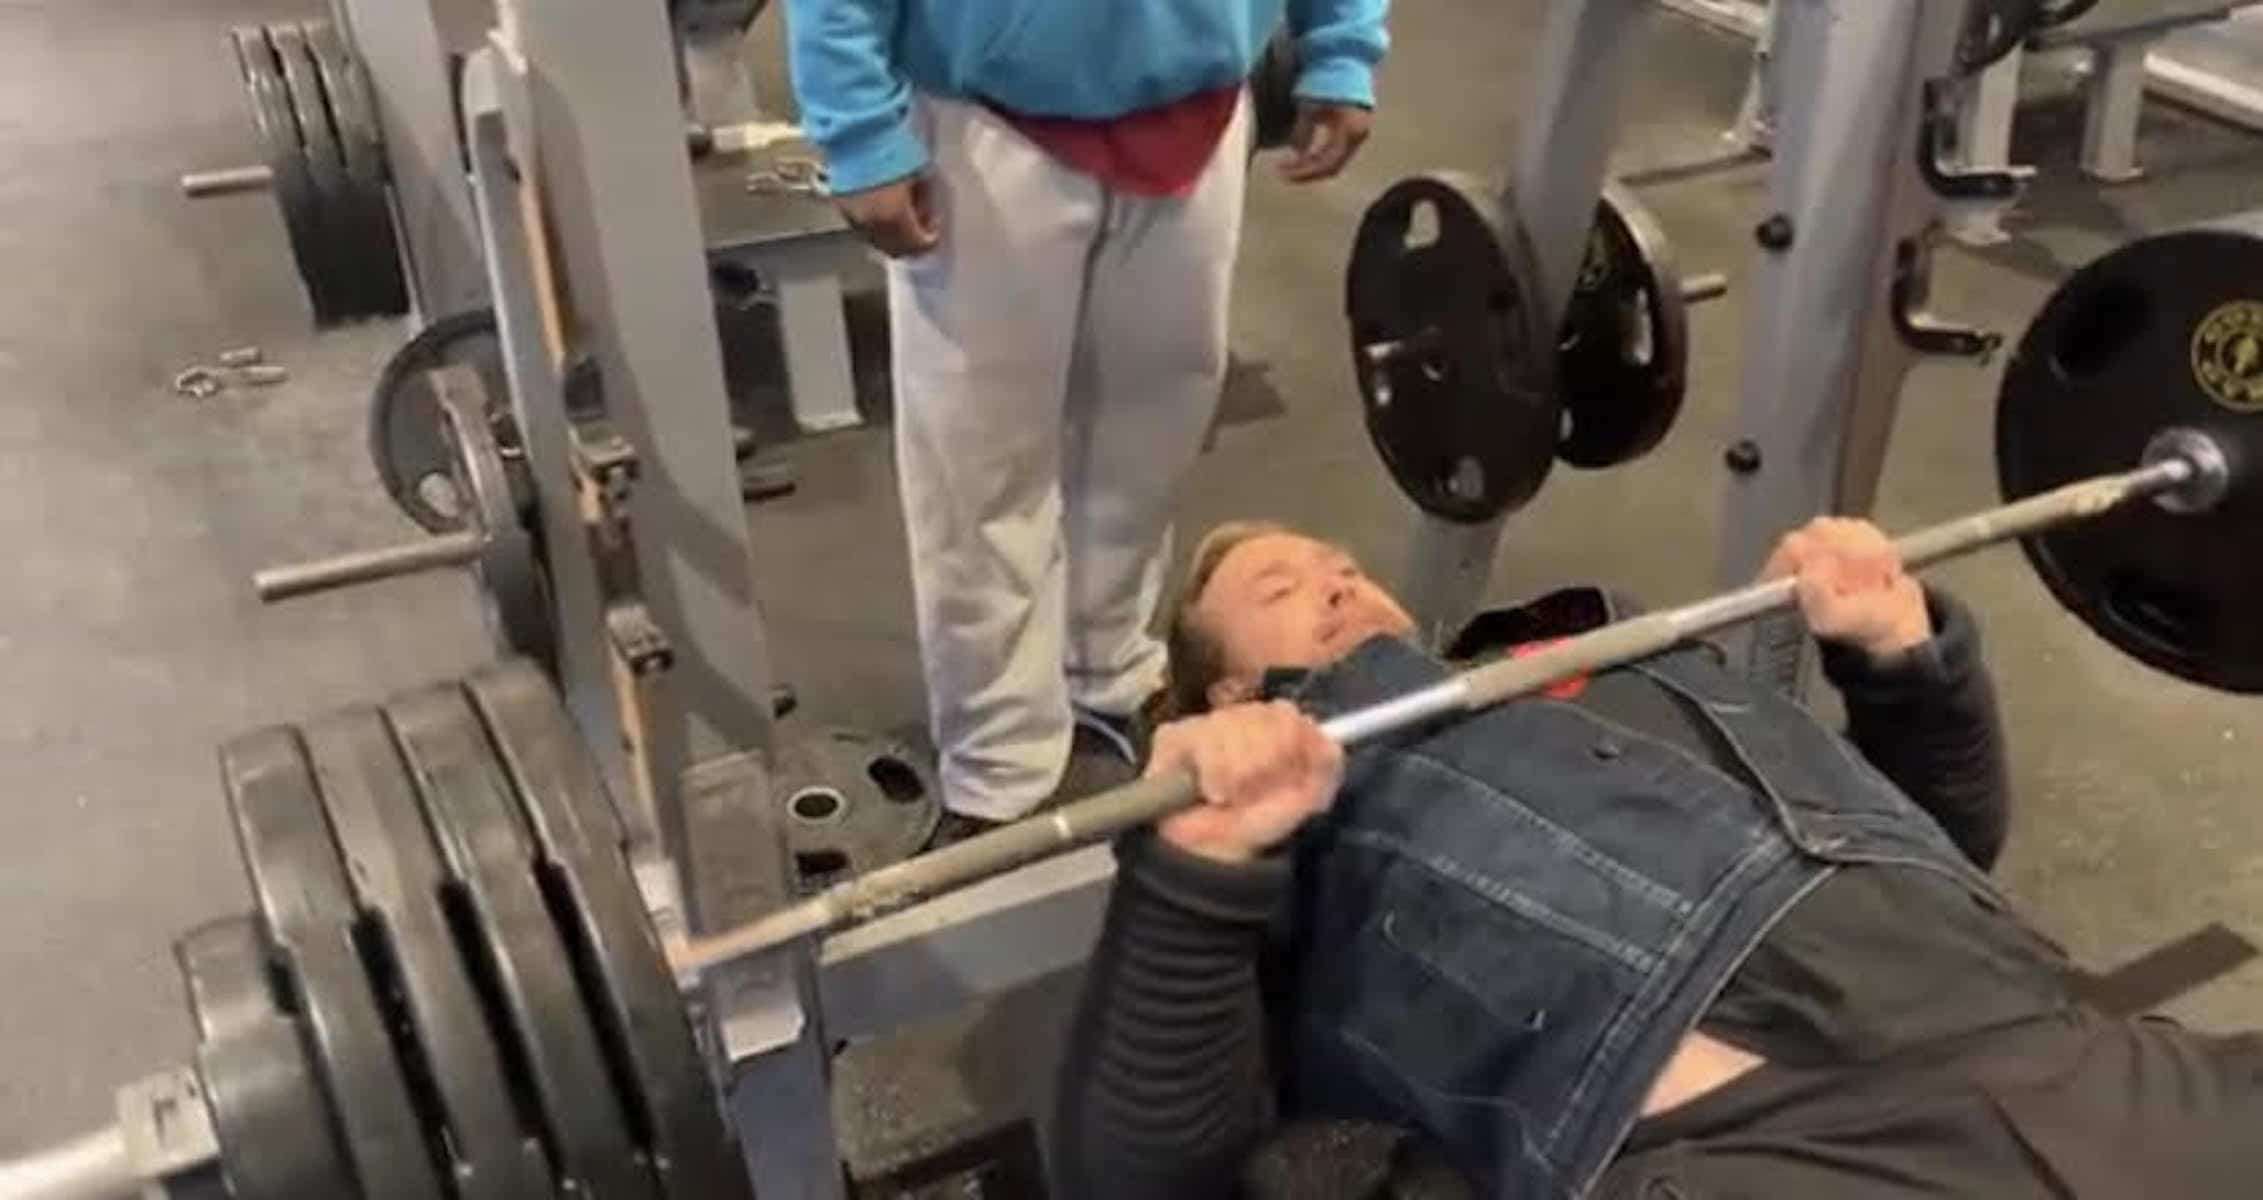 Mike O’Hearn Close-Grip Benches 385 Pounds 10 Times, Shares Huge Arm Workout